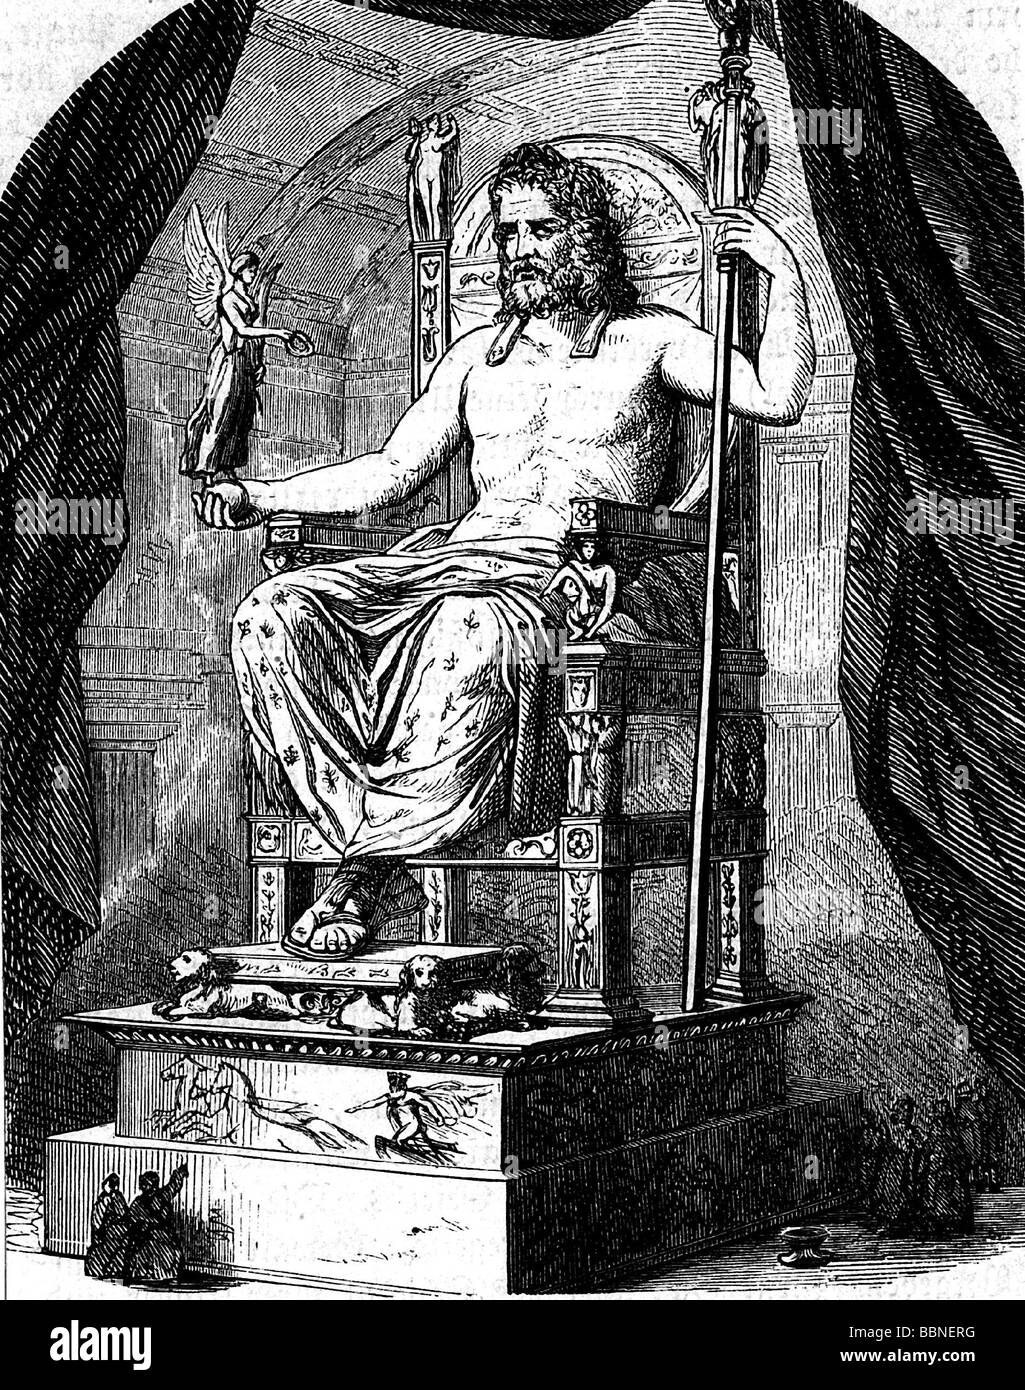 Zeus (Latin: Jupiter), Greek 'divine king', leader of gods, god of sky and thunder, temple of Zeus, Statue of Zeus at Olympia (reconstruction), wood engraving, 19th century, full length, Stock Photo